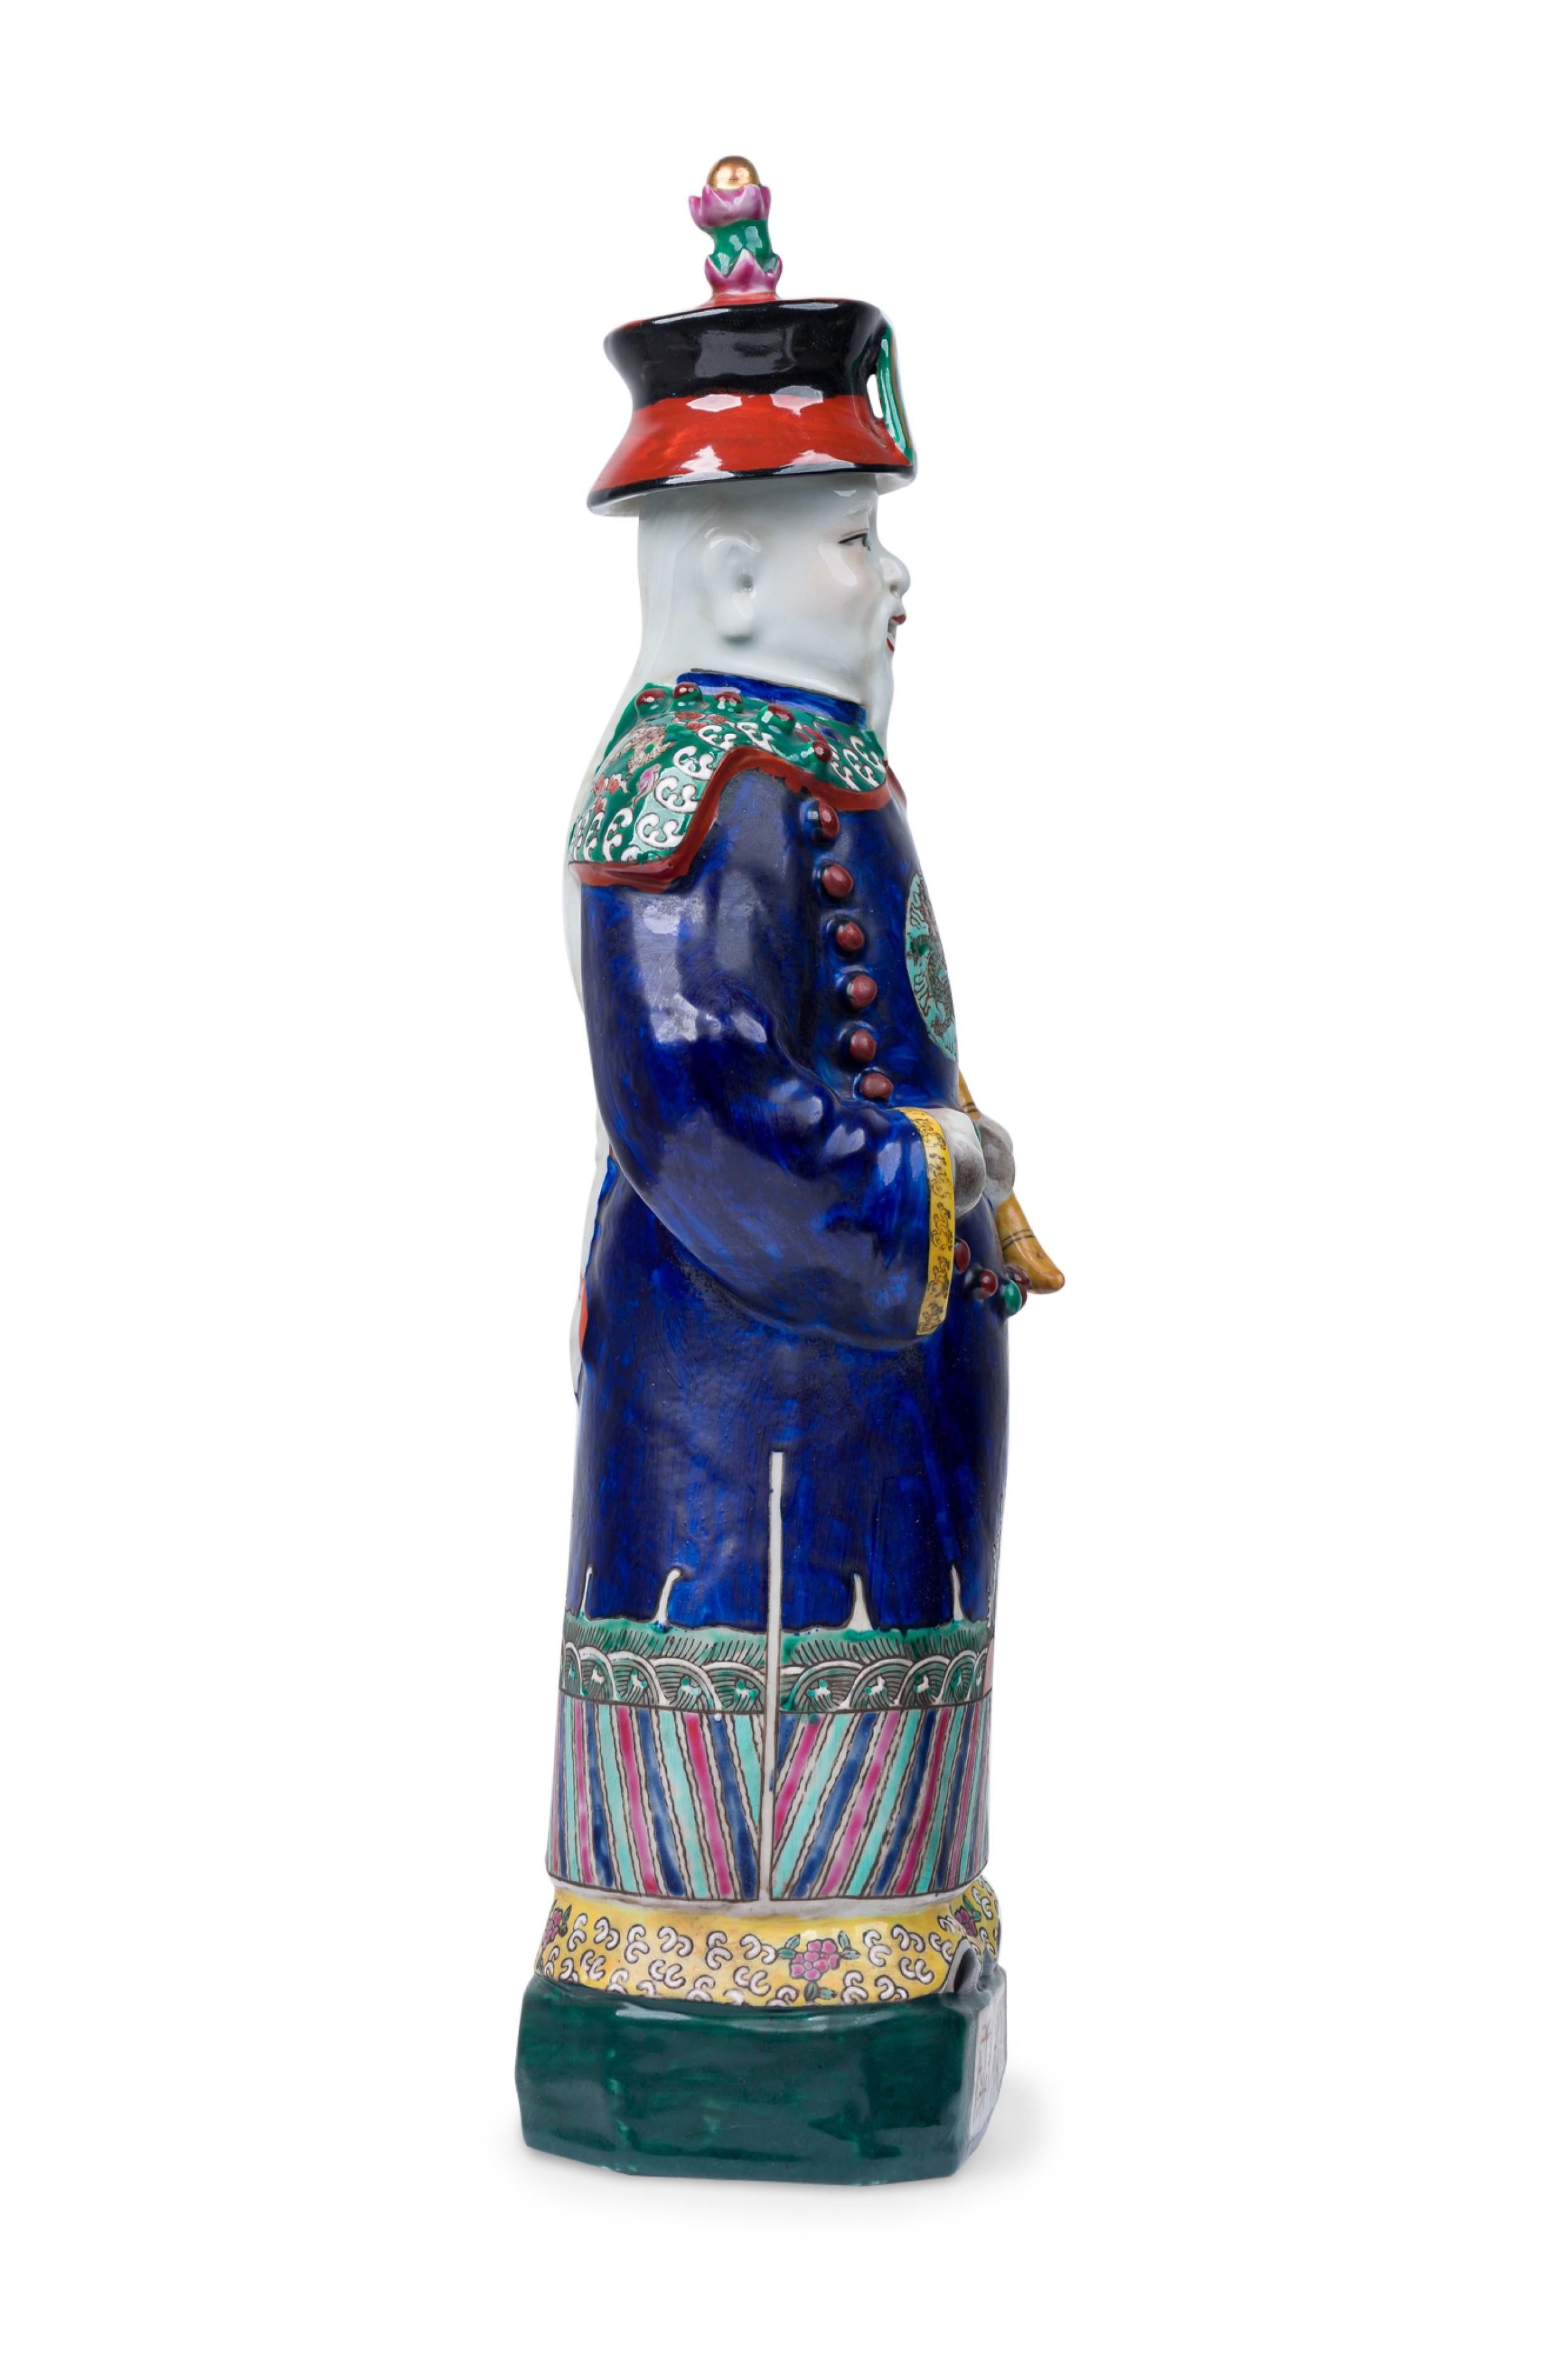 Pair of Chinese Painted Ceramic Figures Depicting a Blue Robed Emperor For Sale 4